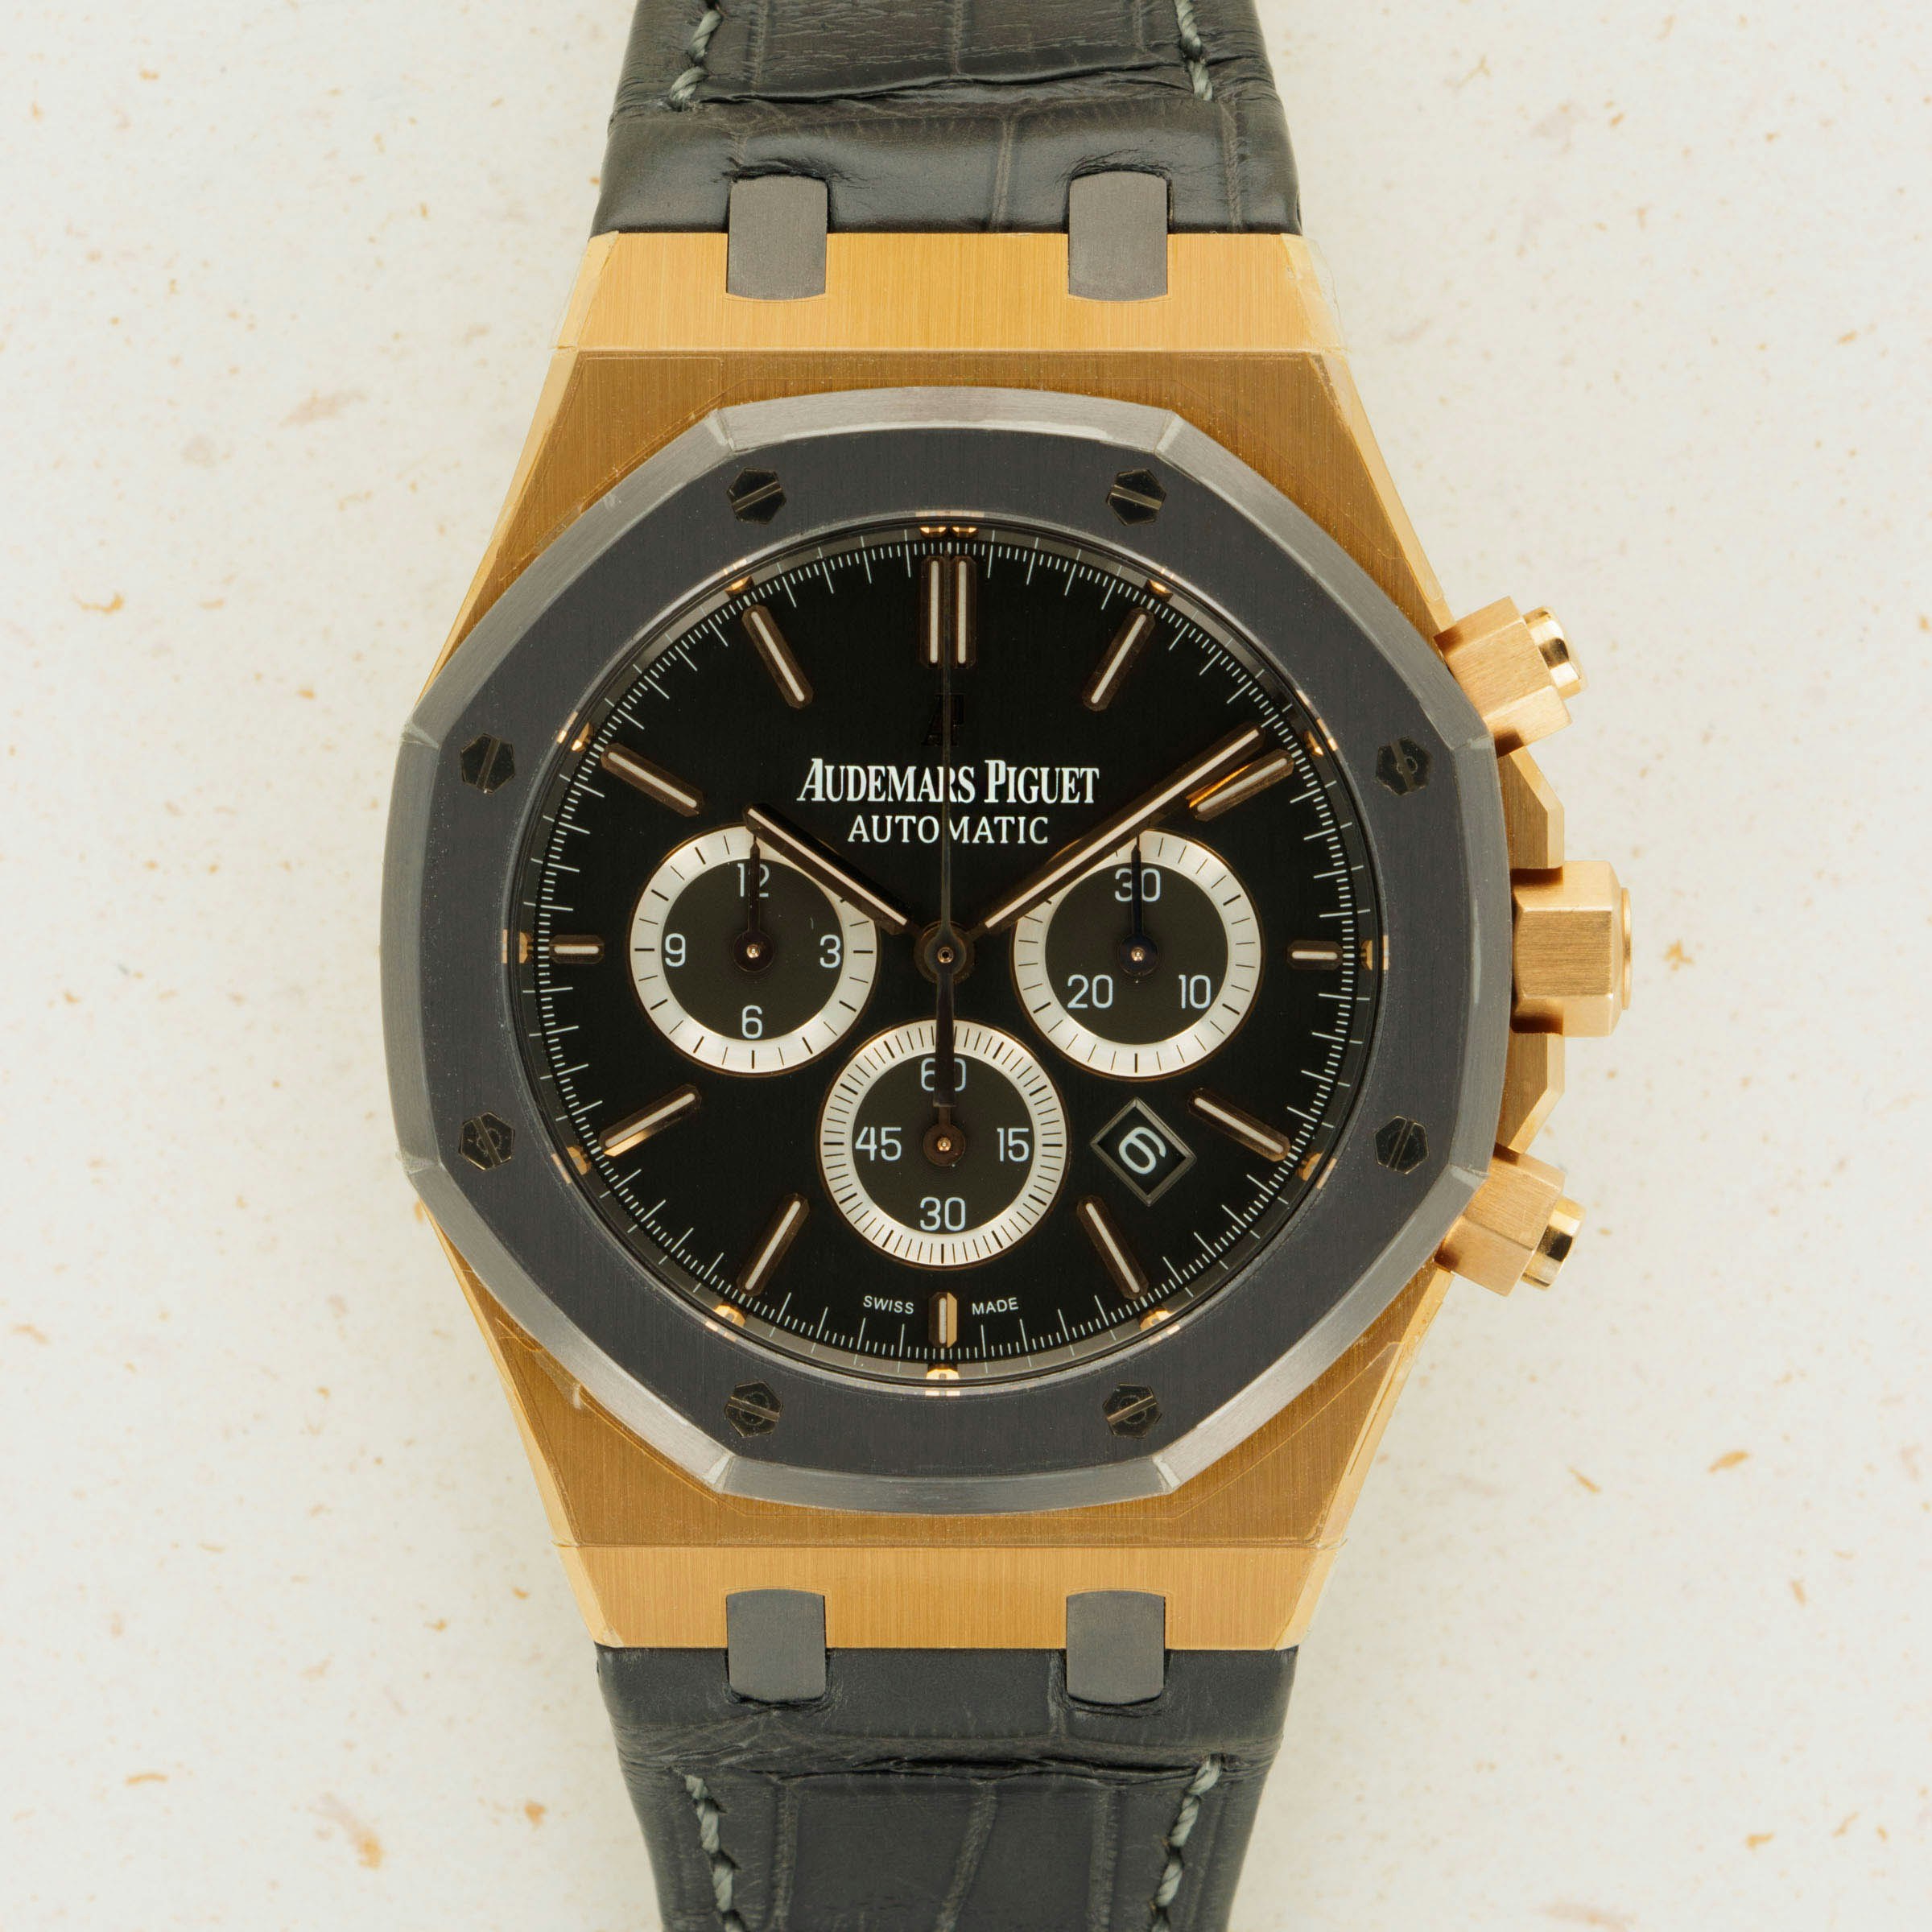 Thumbnail for Audemars Piguet Royal Oak Leo Messi Limited Edition 26325OL.OO.D005CR.01 Rose Gold and Tantalum